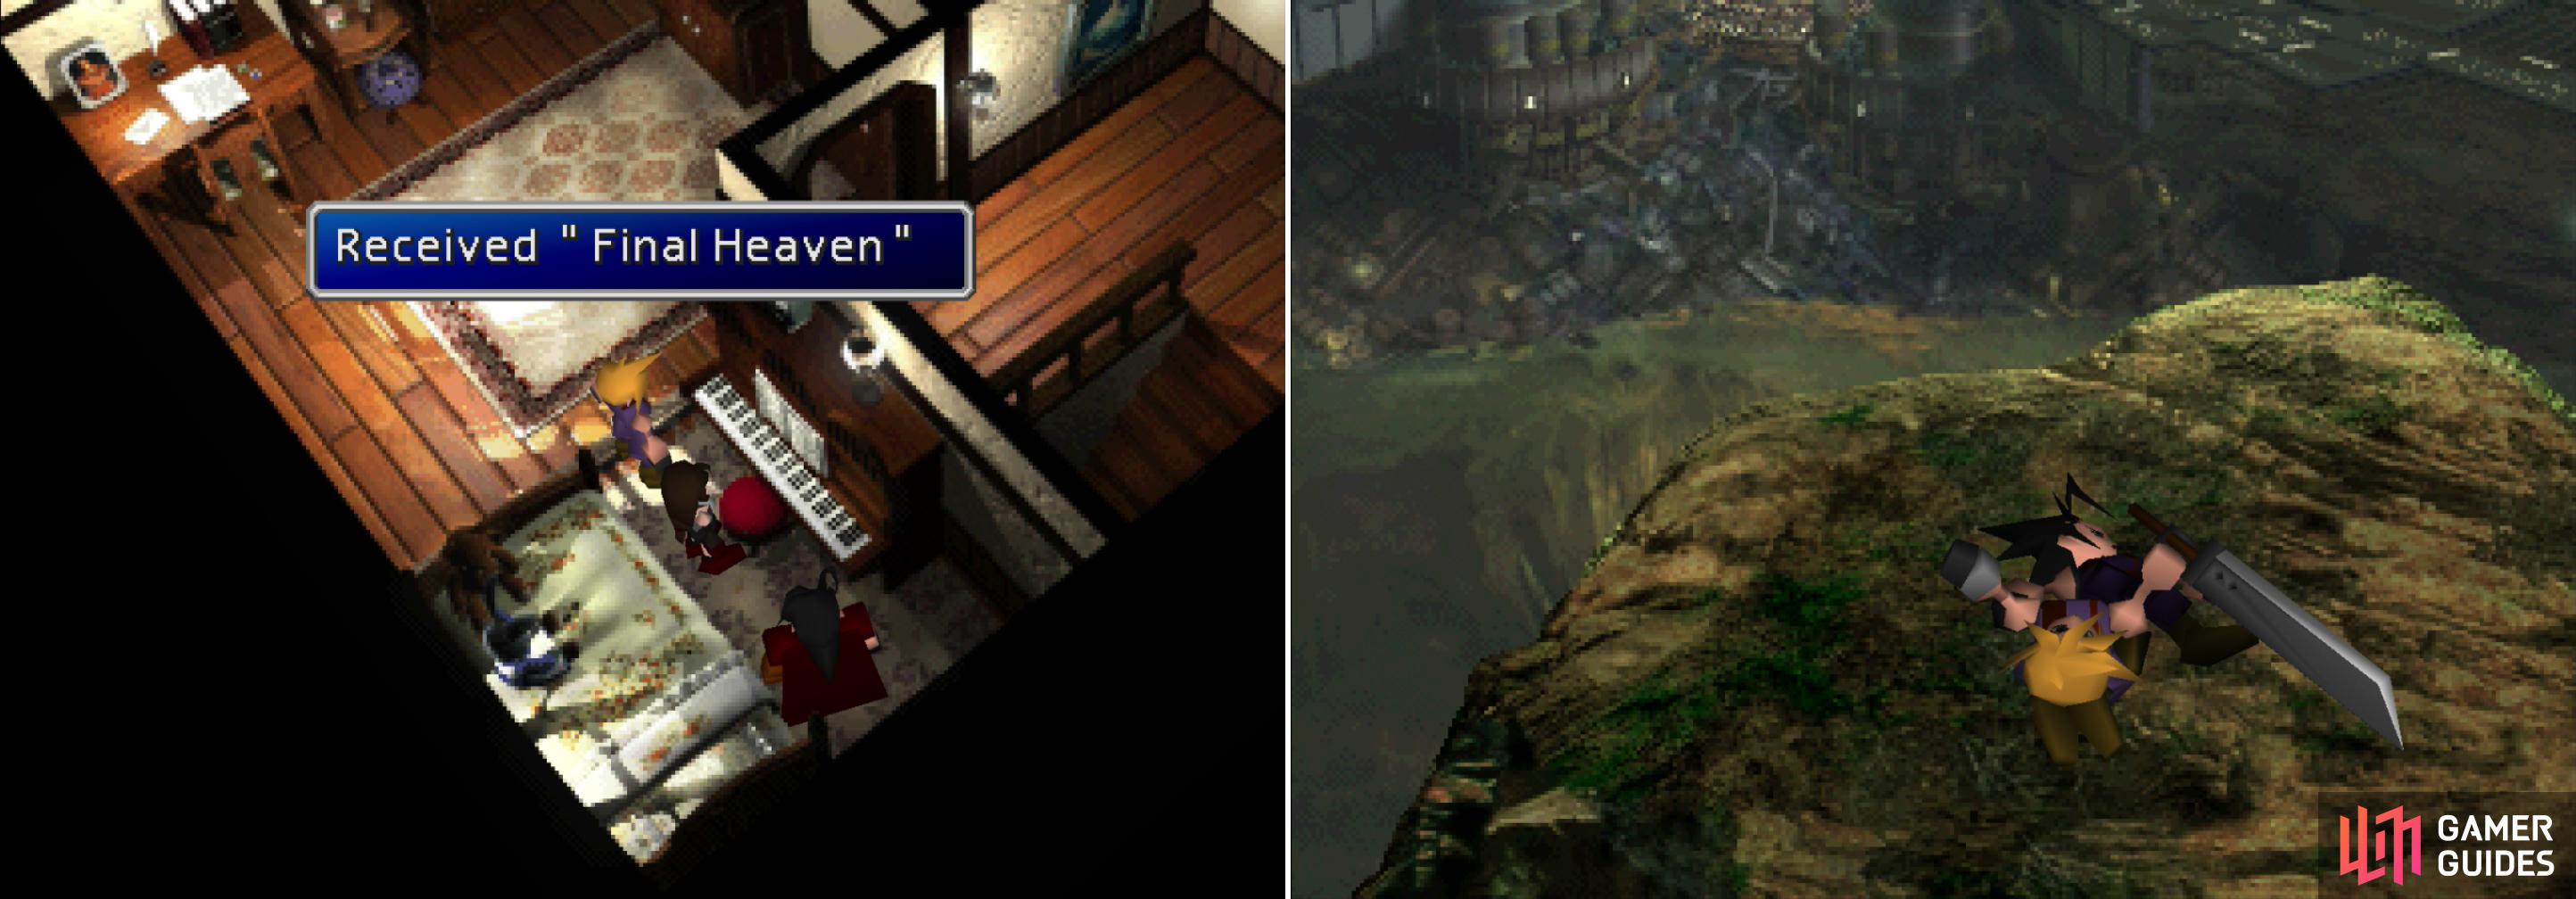 Play Tifas piano one final time to score her ultimate Limit Break (left) then return to the Shinra Mansion to find out more of Clouds backstory (right).